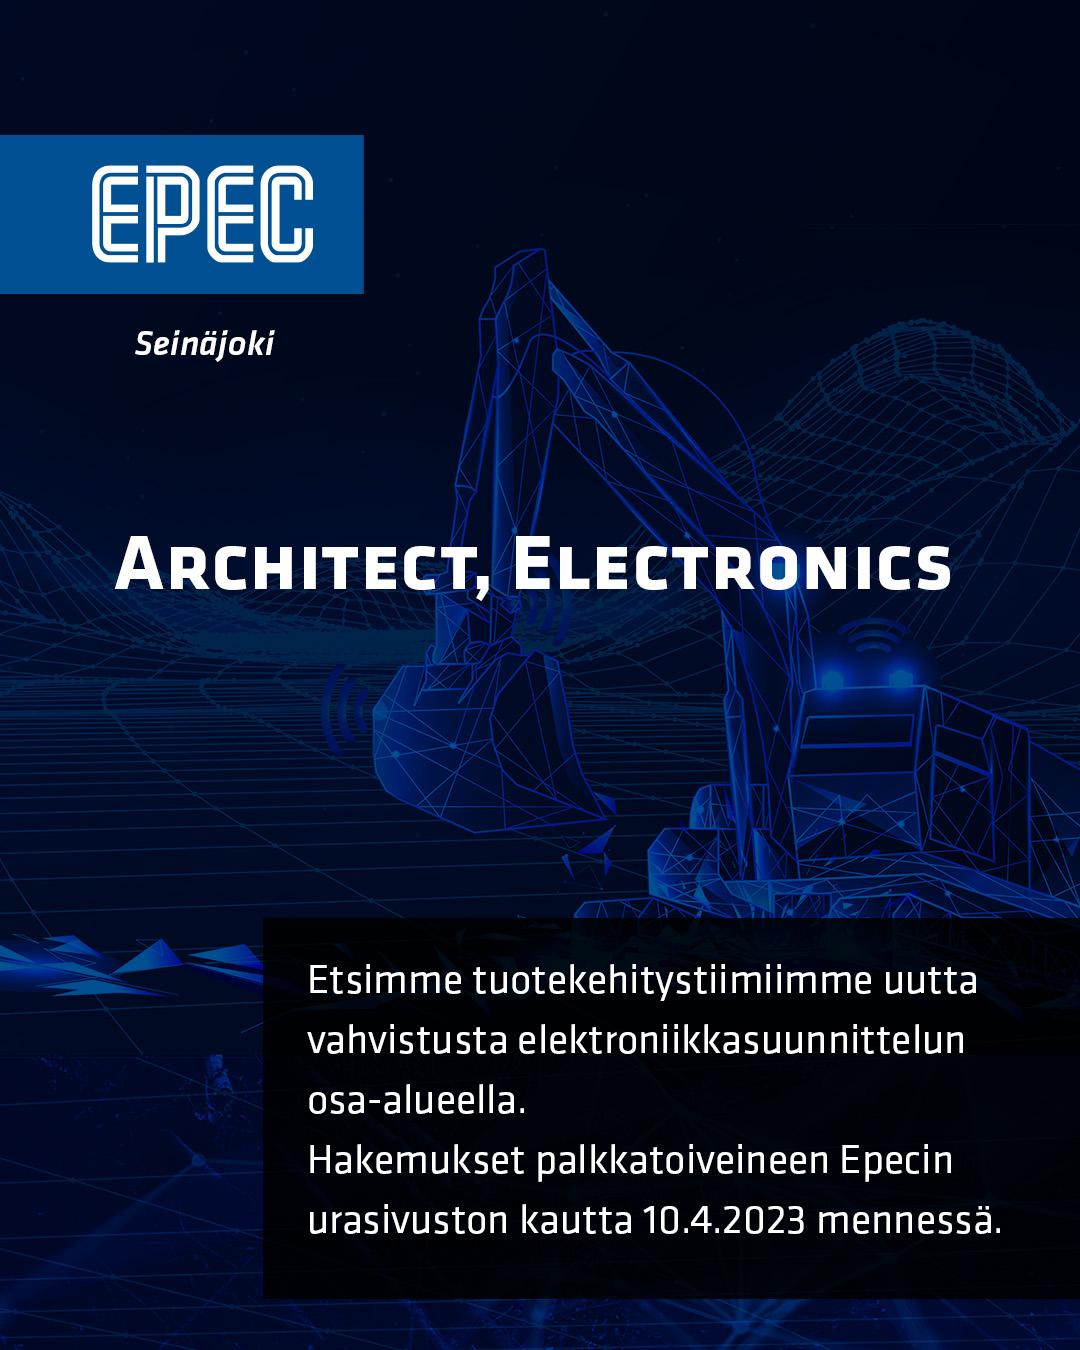 Epec-Supplier quality engineer